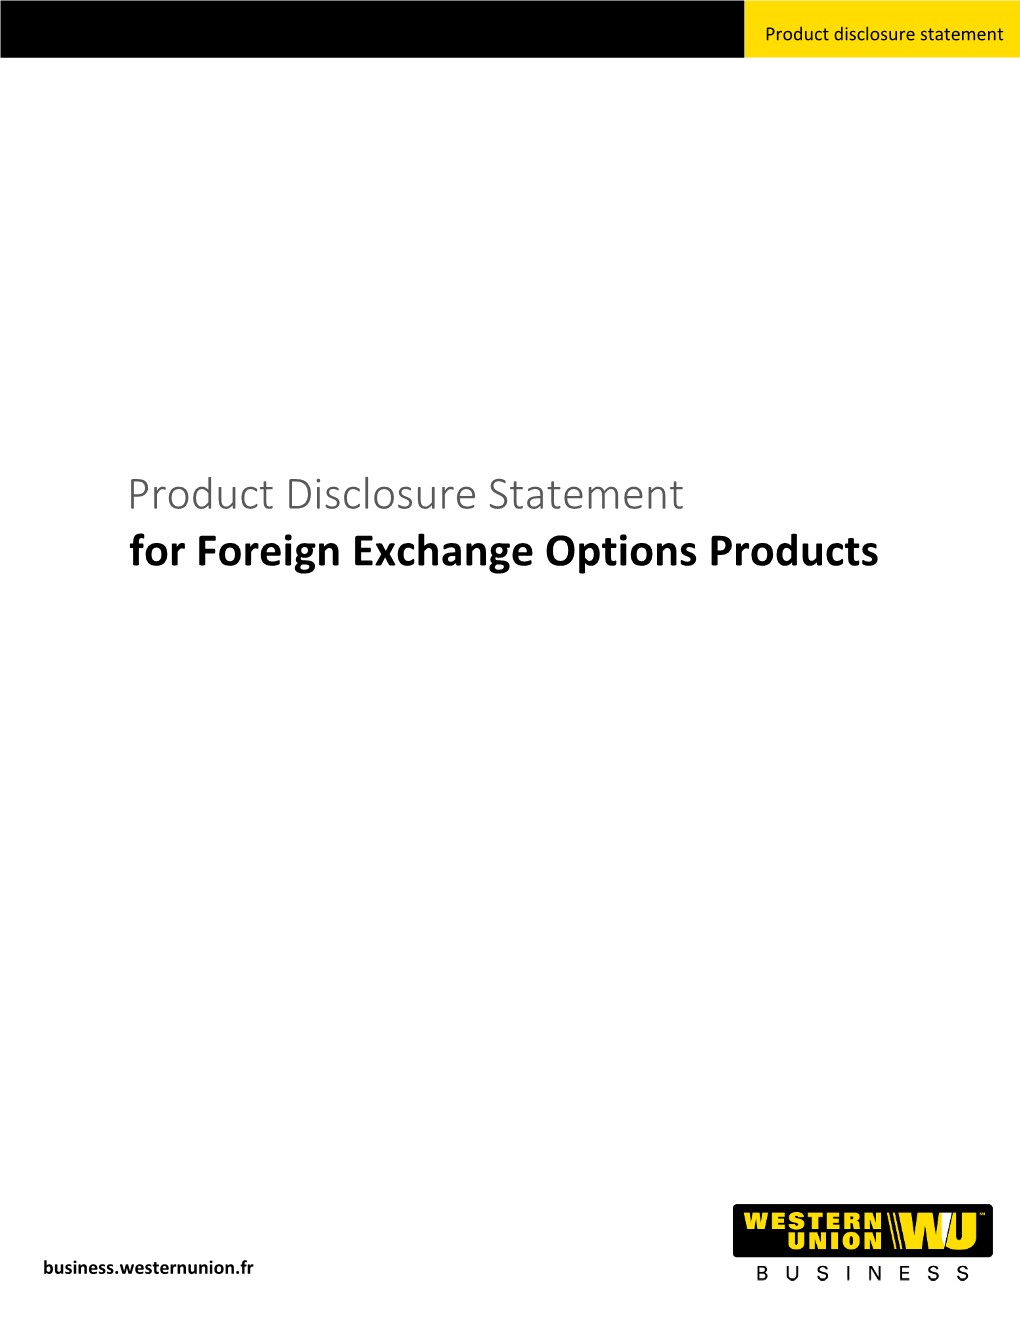 Product Disclosure Statement for Foreign Exchange Options Products